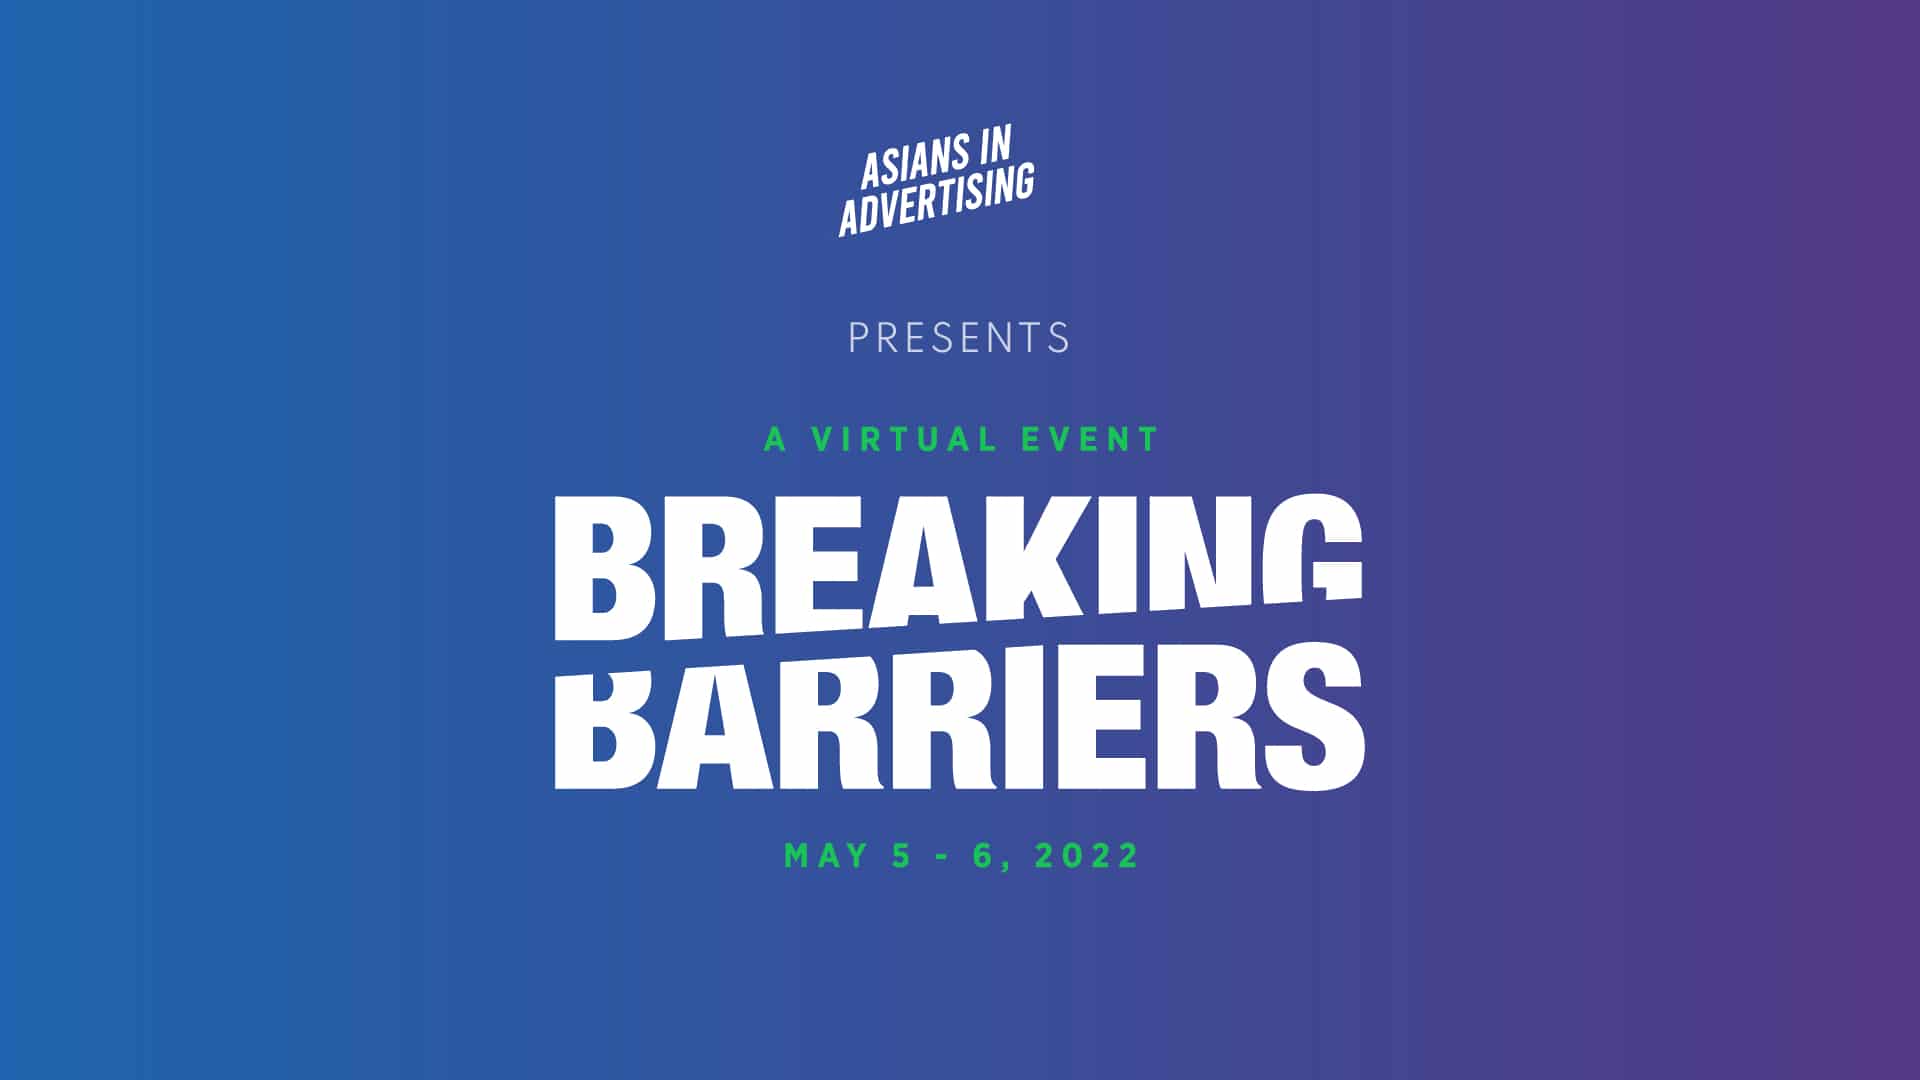 blue and purple gradient background, with text overlay that says "breaking barriers"